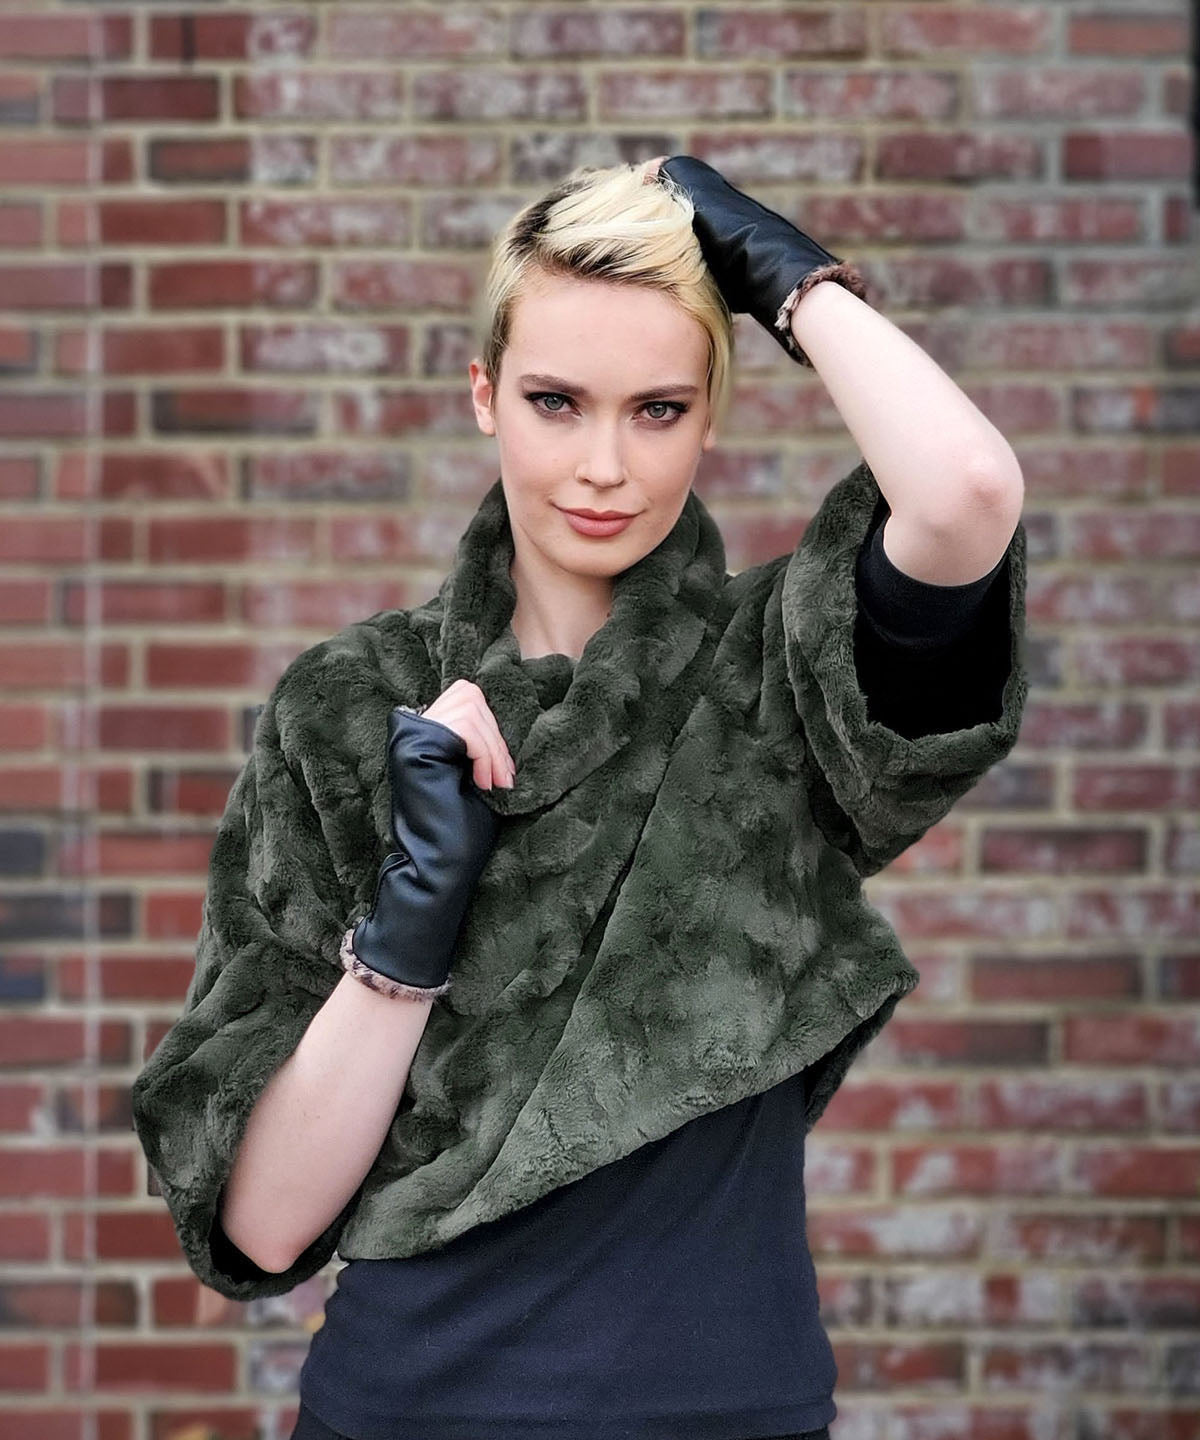 Fingerless / Driving Gloves - Vegan Leather in Black with Cuddly Faux Fur (SOLD OUT)